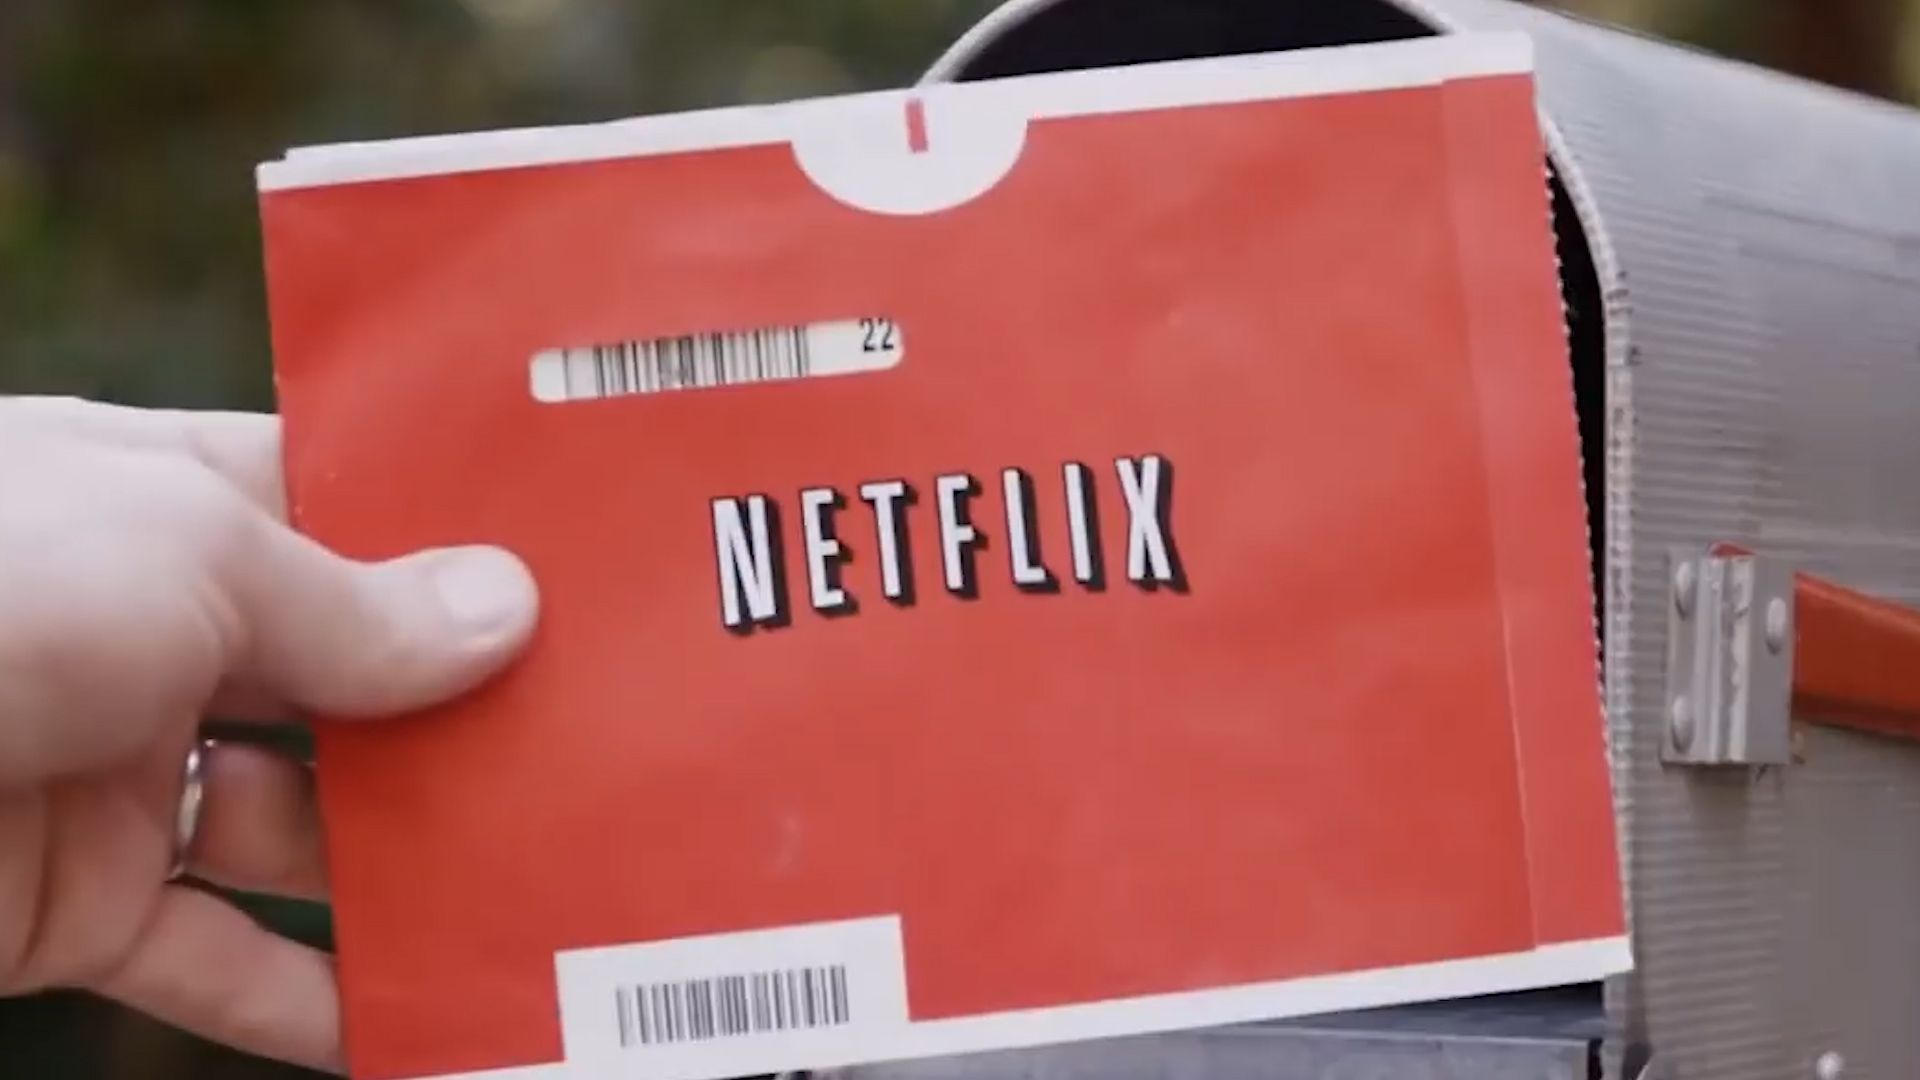 After racking up $40 in late fees for a VHS, Reed Hastings was inspired to start Netflix.